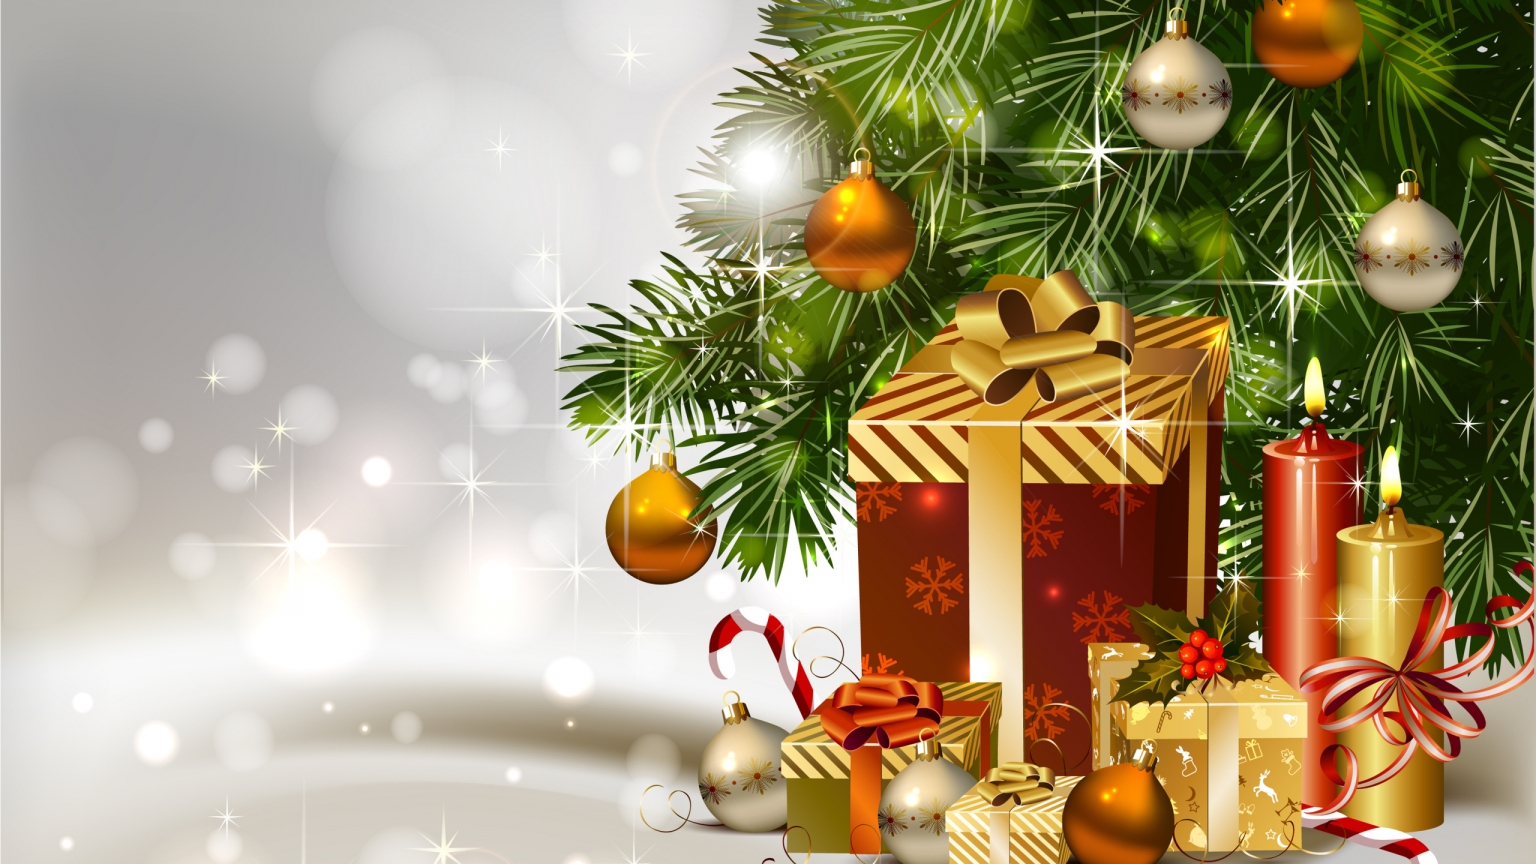 Gifts Under Christmas Tree for 1536 x 864 HDTV resolution